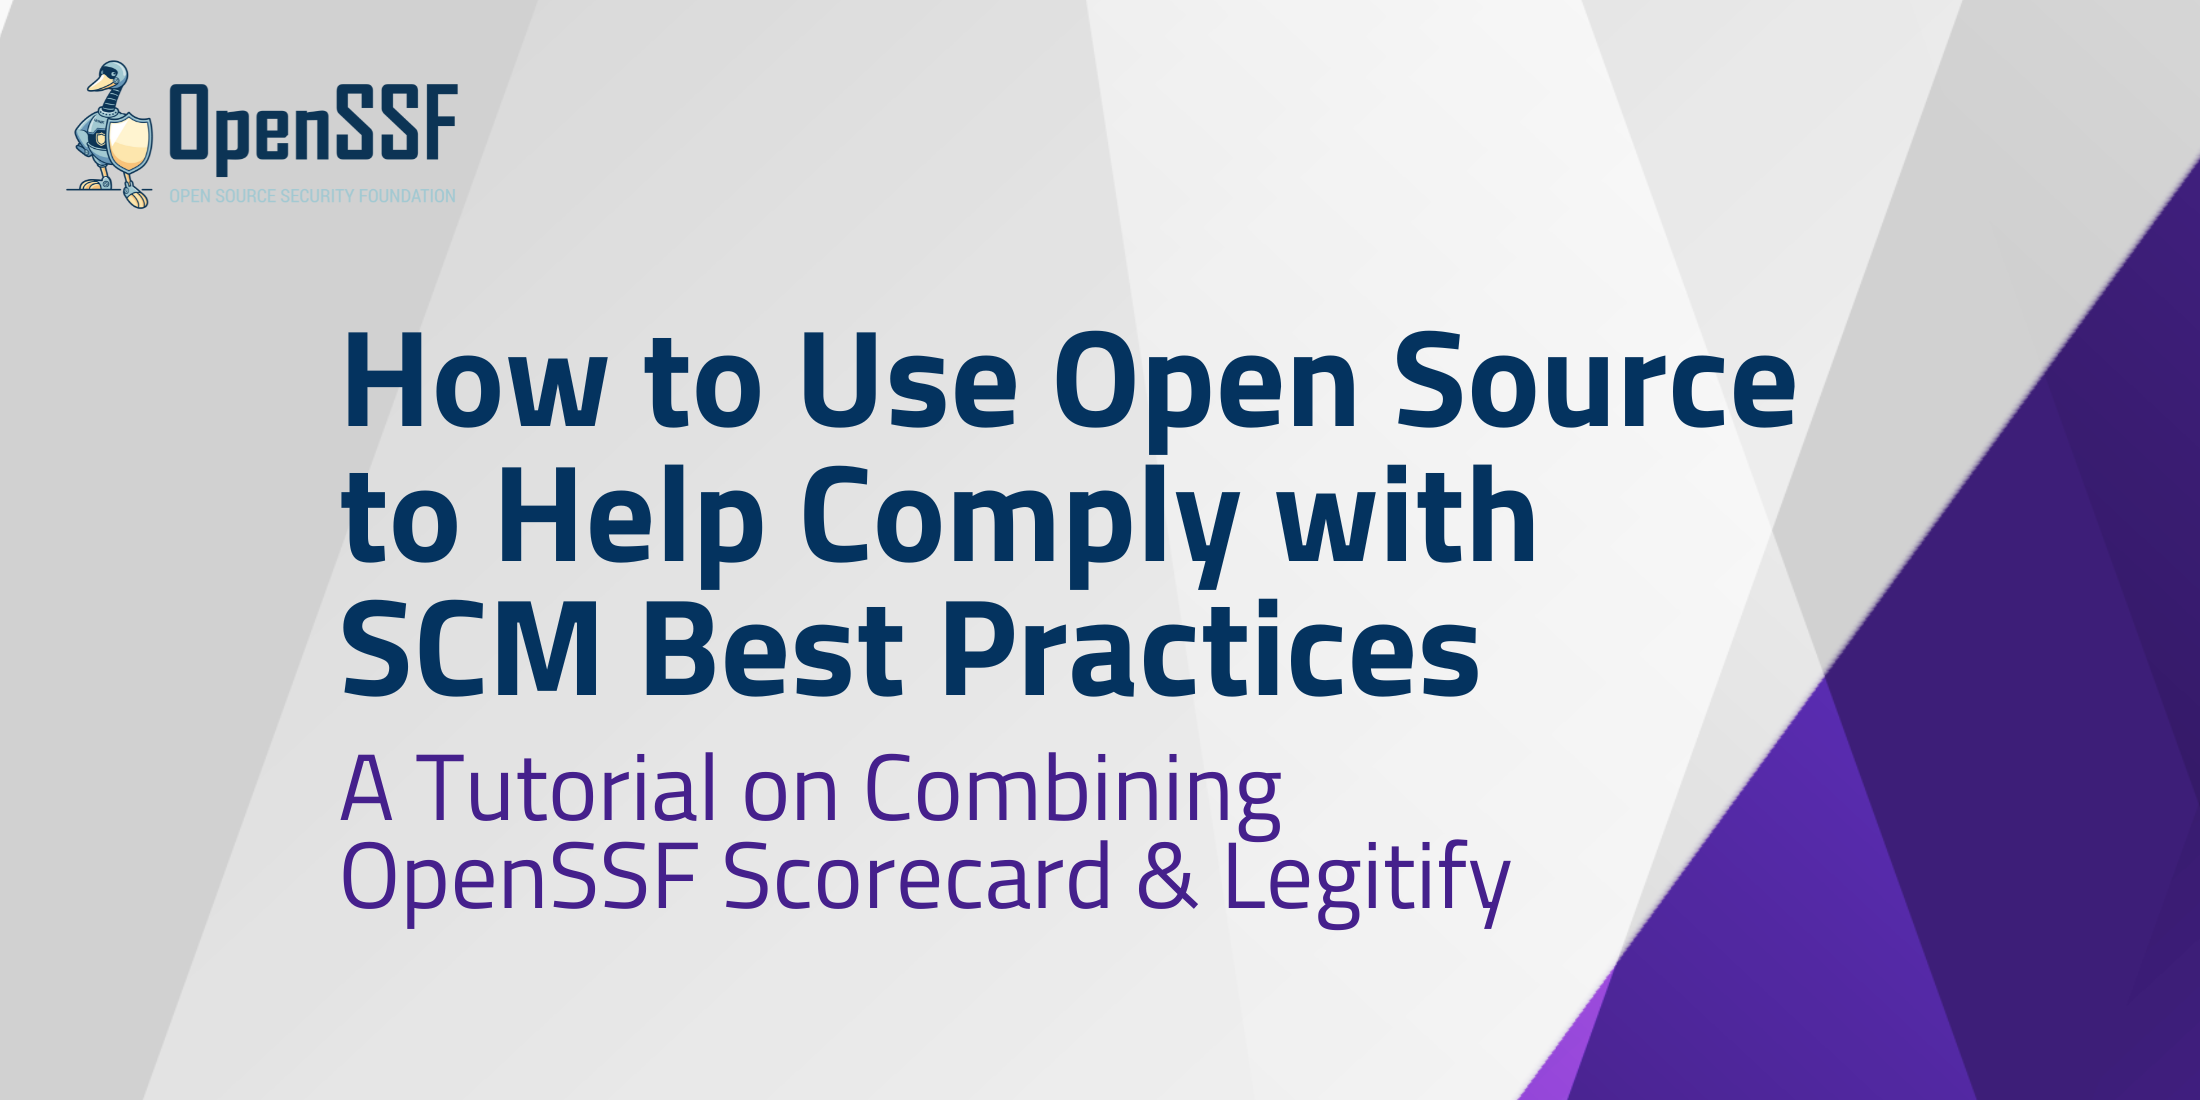 How to Use Open Source to Help Comply with SCM Best Practices